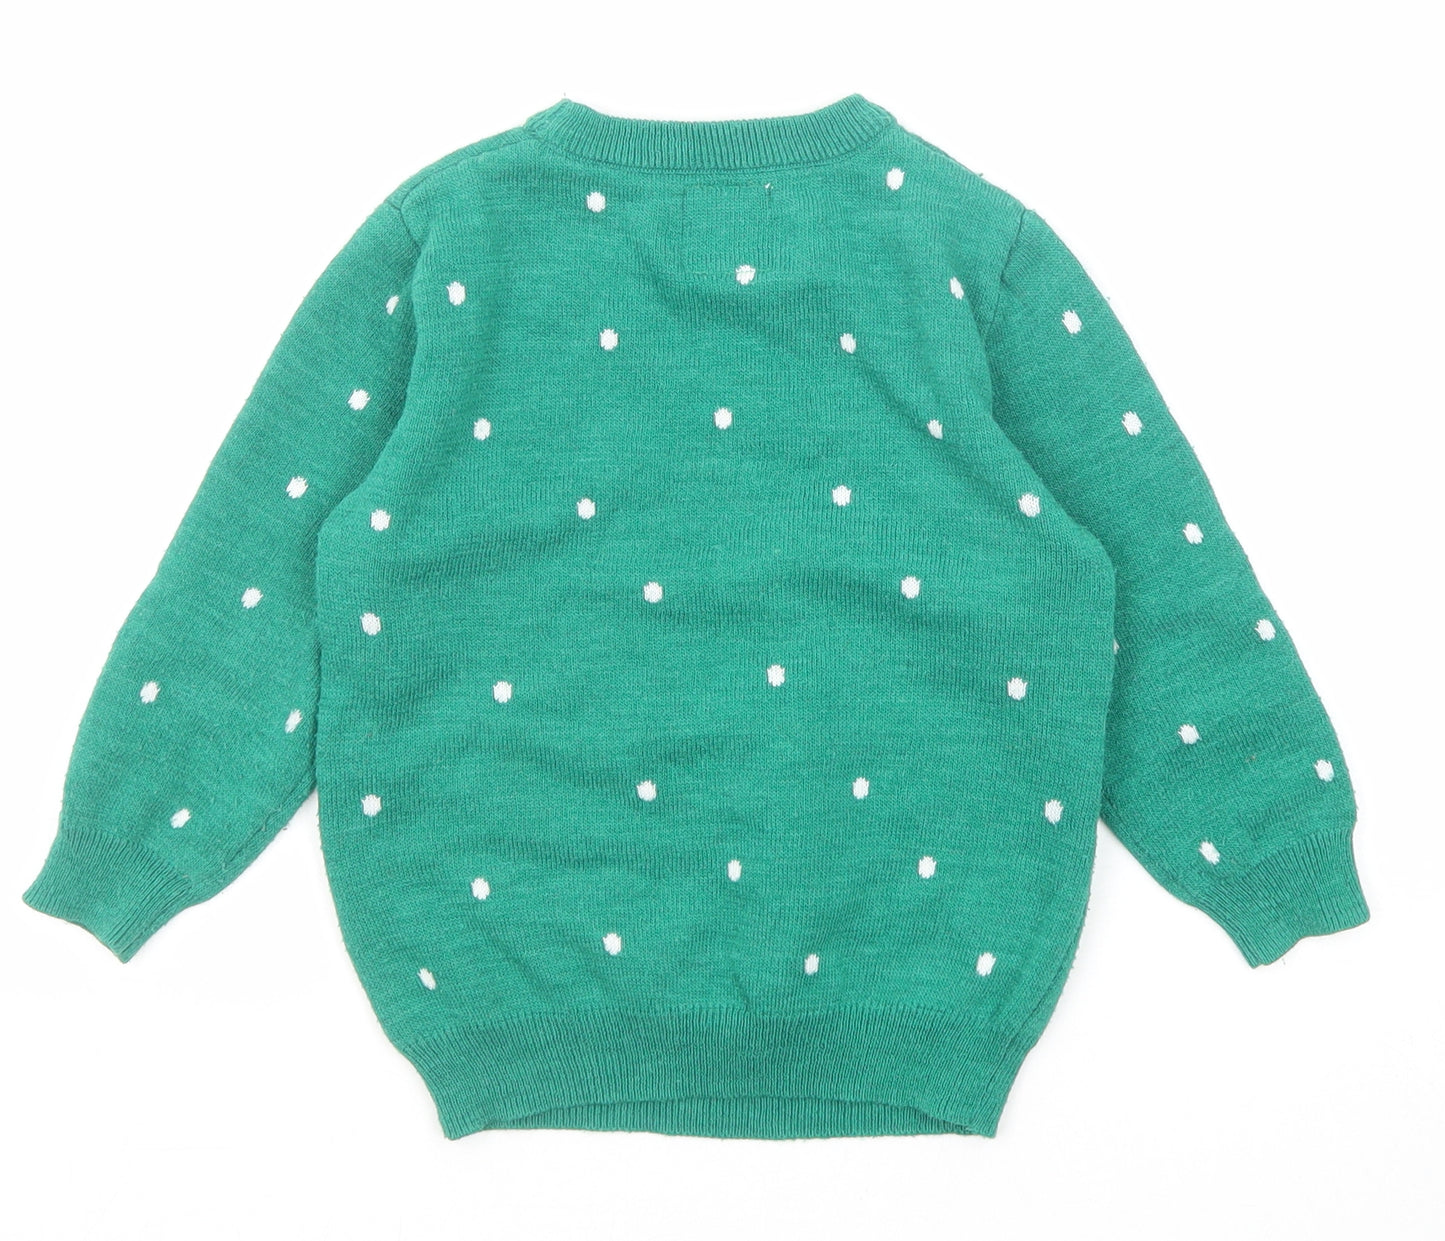 Paw Patrol Boys Green Crew Neck Polka Dot Cotton Pullover Jumper Size 3-4 Years Pullover - Christmas Santa Paws